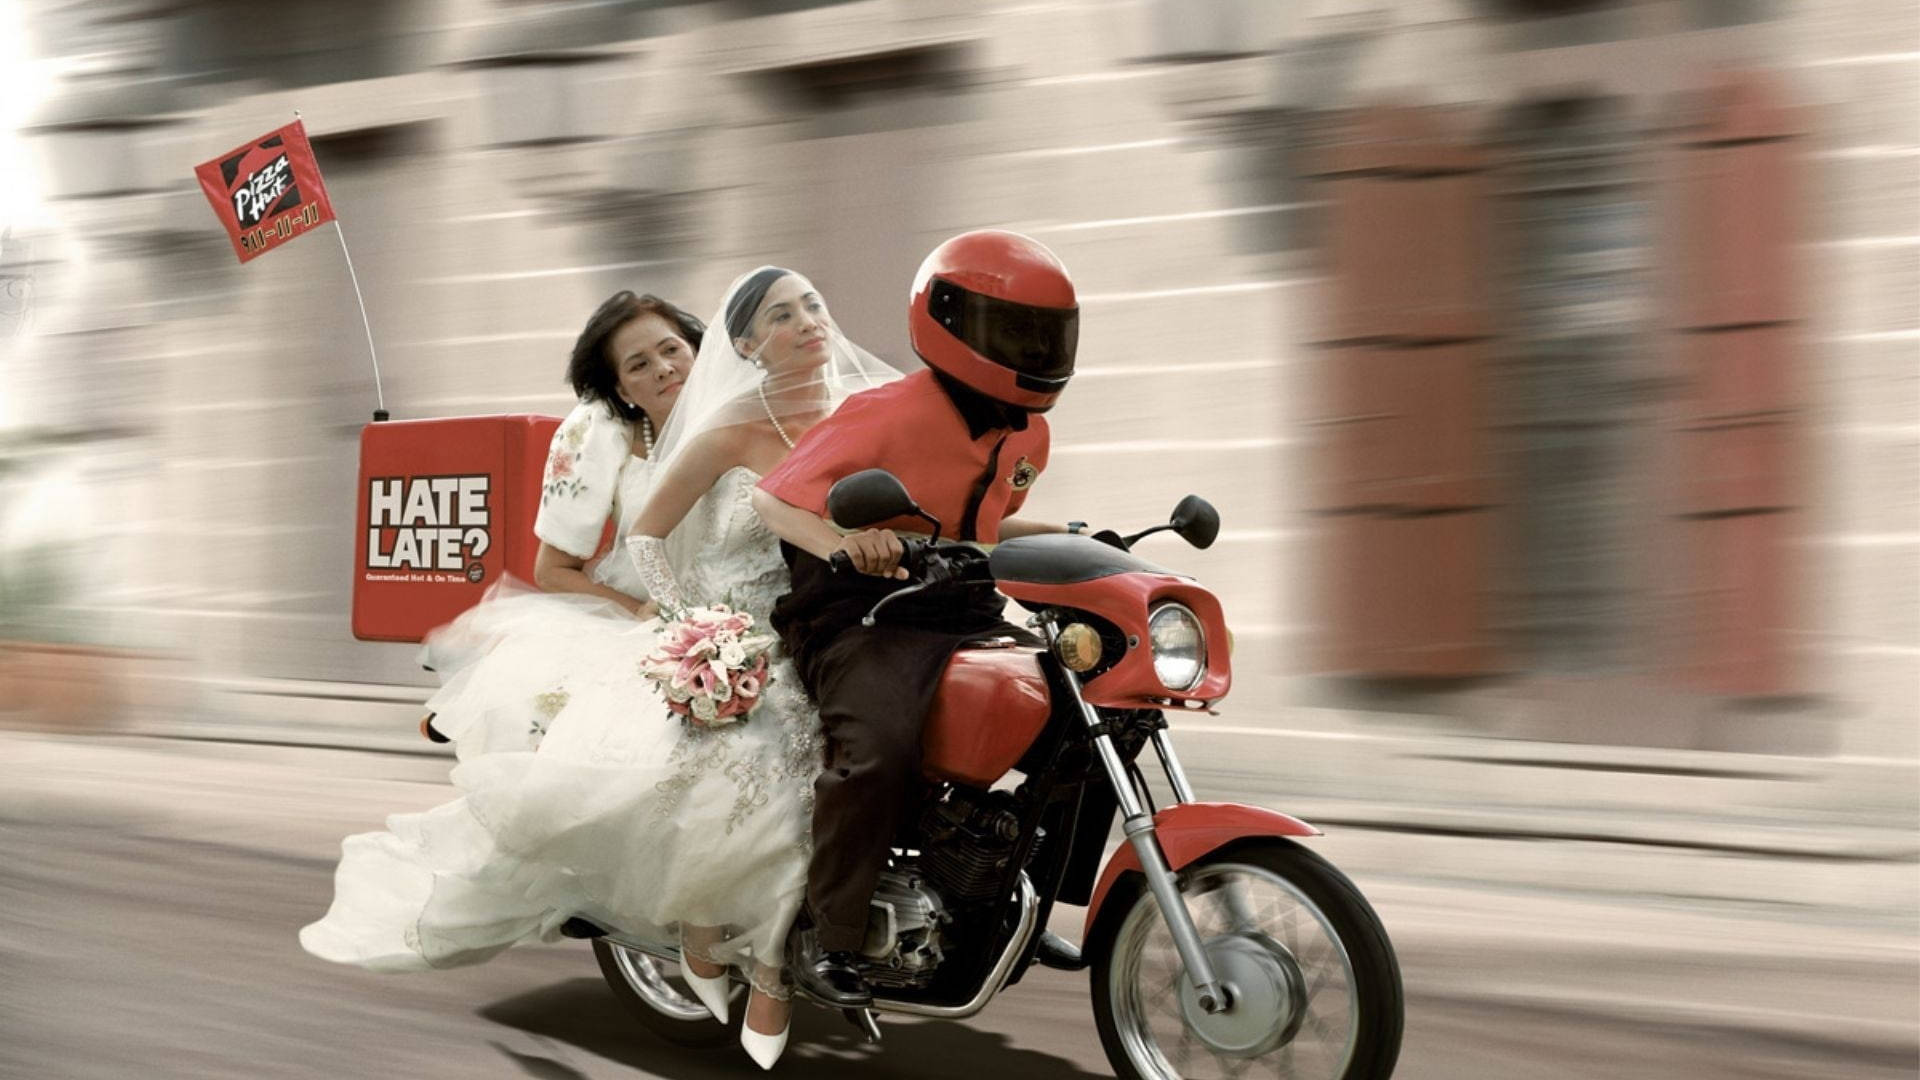 Bride On A Pizza Hut Delivery Background